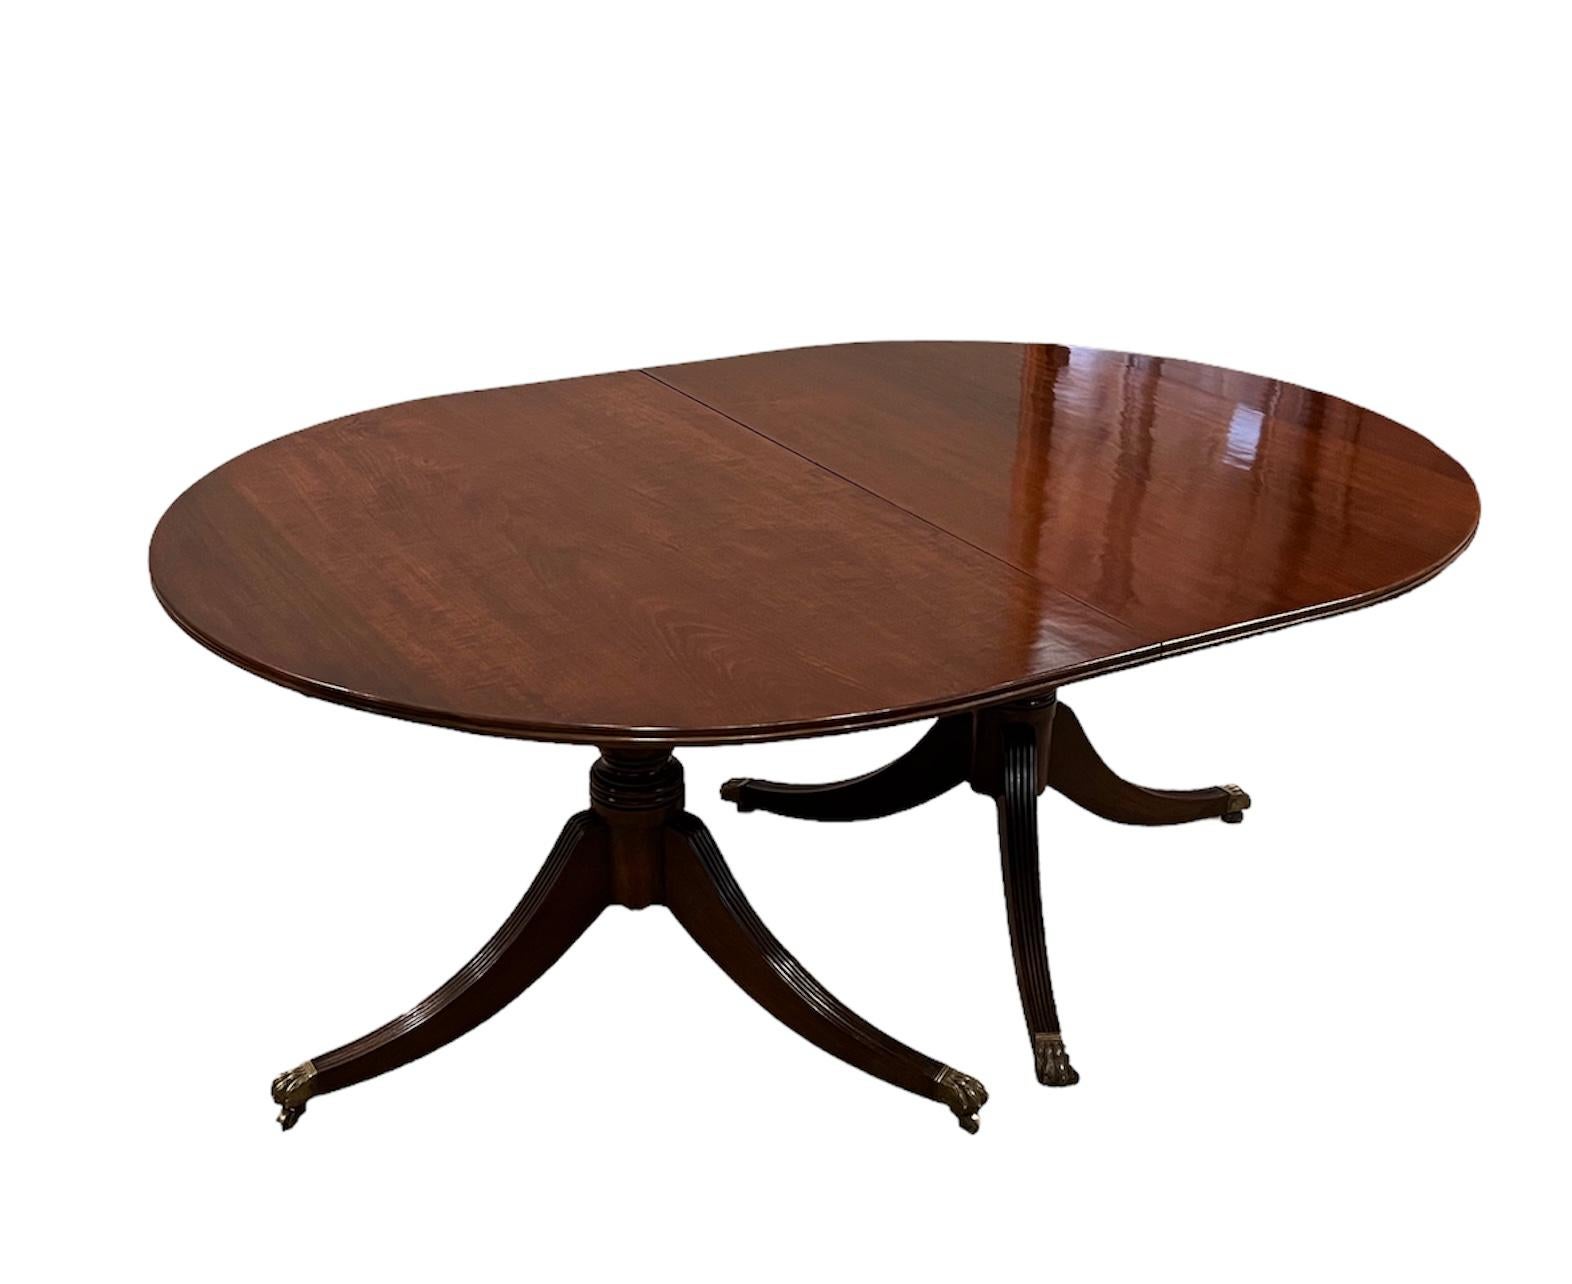 This lovely George III Style 2 pedestals Mahogany Dining Table with 
2 leaves 6 clips.  Table was tightn& polished. In easy to use condition. 
Each leaf adds 12 inches. Total length 96 inches 